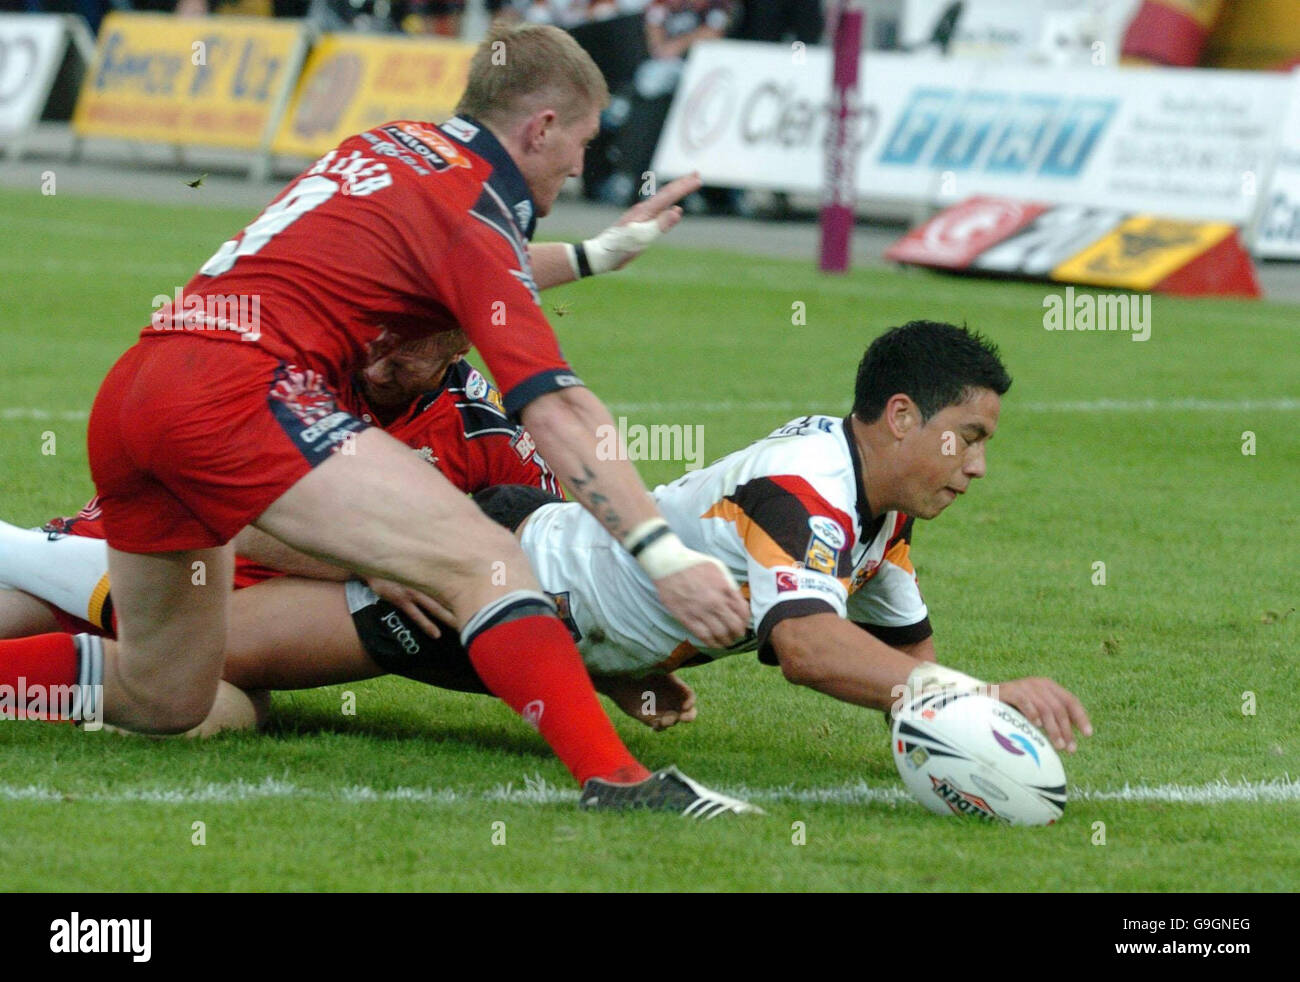 Salford's Malcolm Alker can't stop Bradford's Shontayne Hape scoring his 2nd try during the Engage Super League play-off at Odsal Stadium, Bradford. Stock Photo